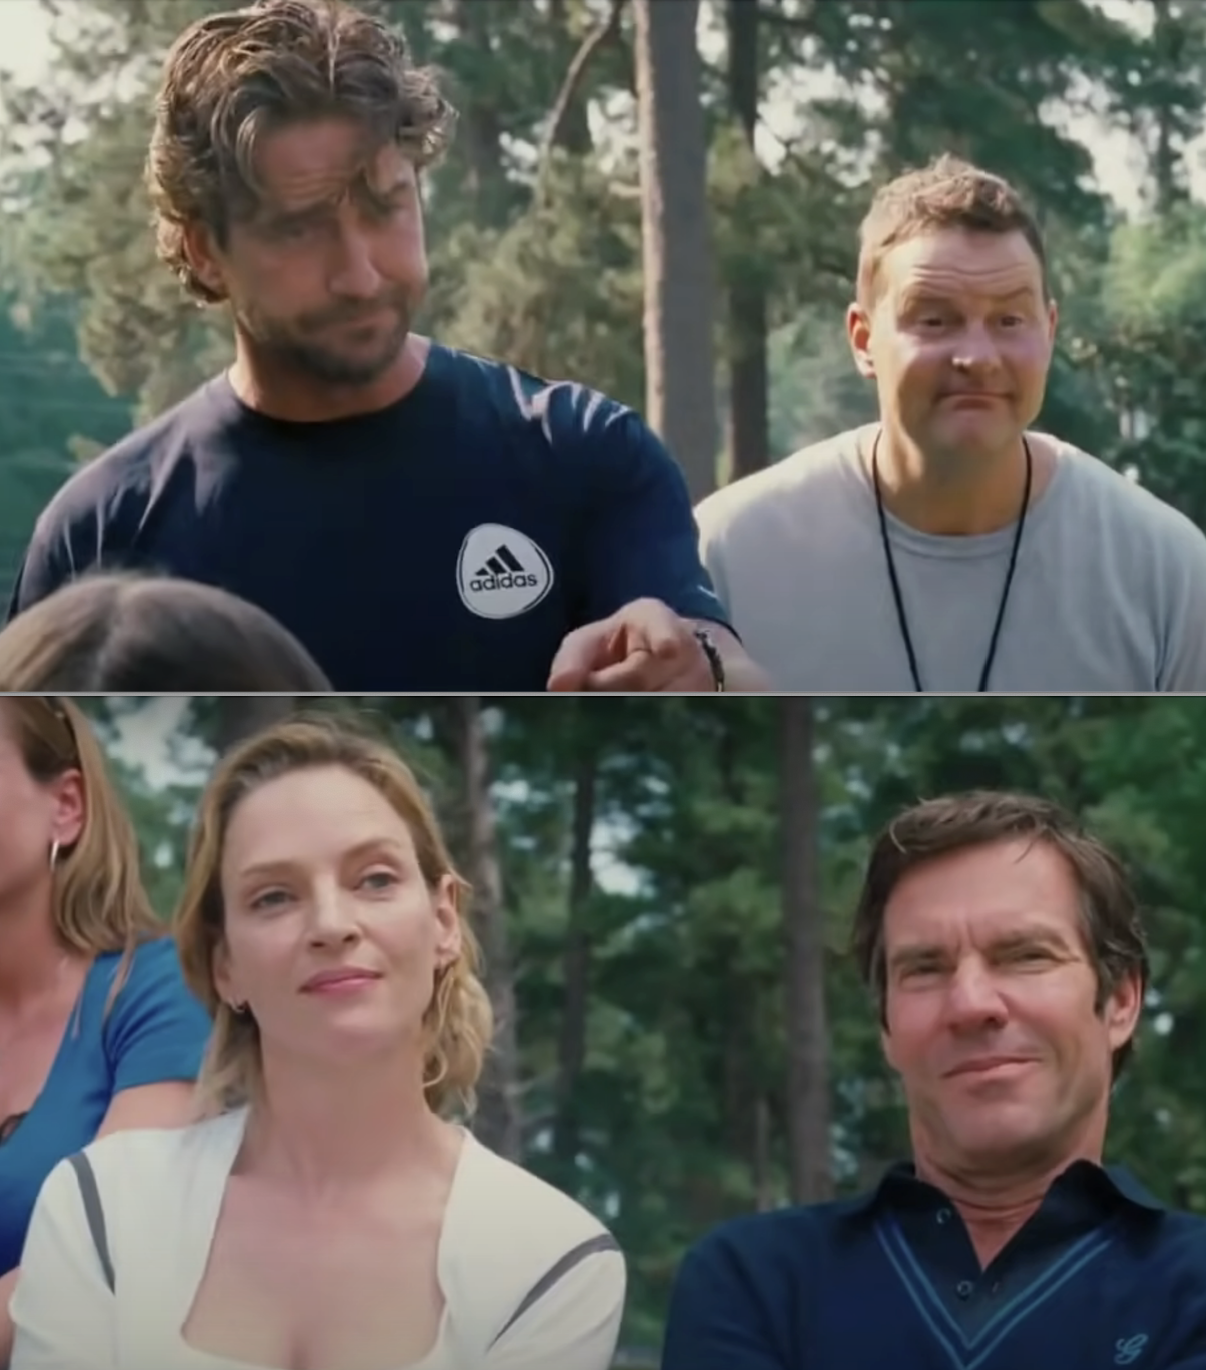 Gerard, Dennis, and Uma on a soccer field in the movie